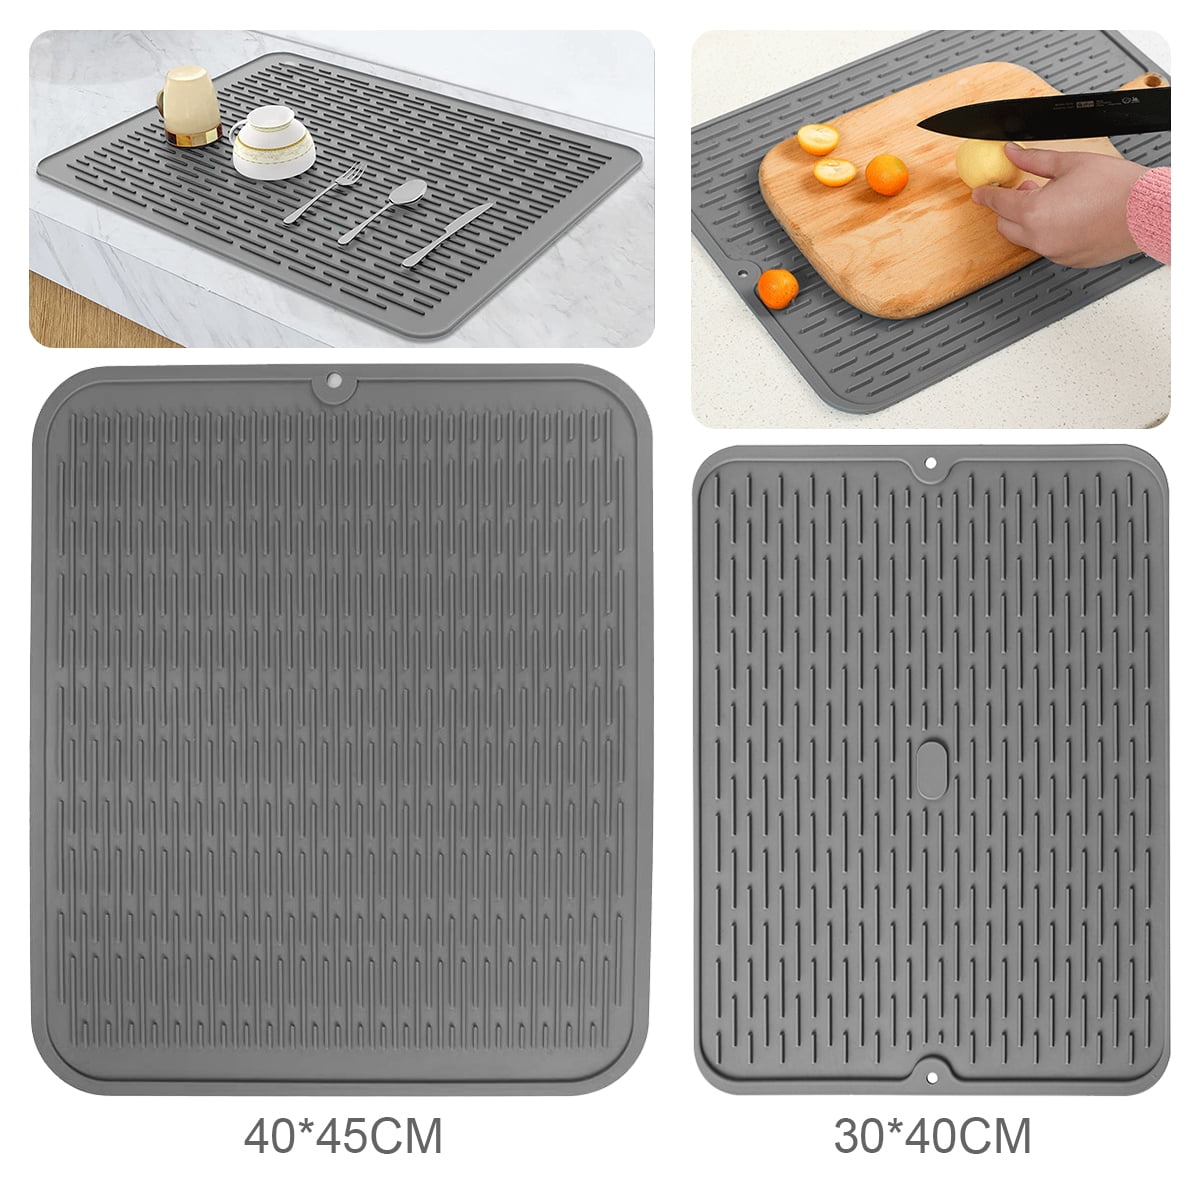 Polder Aqua-Dry Digital Kitchen Scale, Measure Both Liquid and Dry Increments, Removeable Silicone Mat, Easy to Clean, Large Numerals for Easy